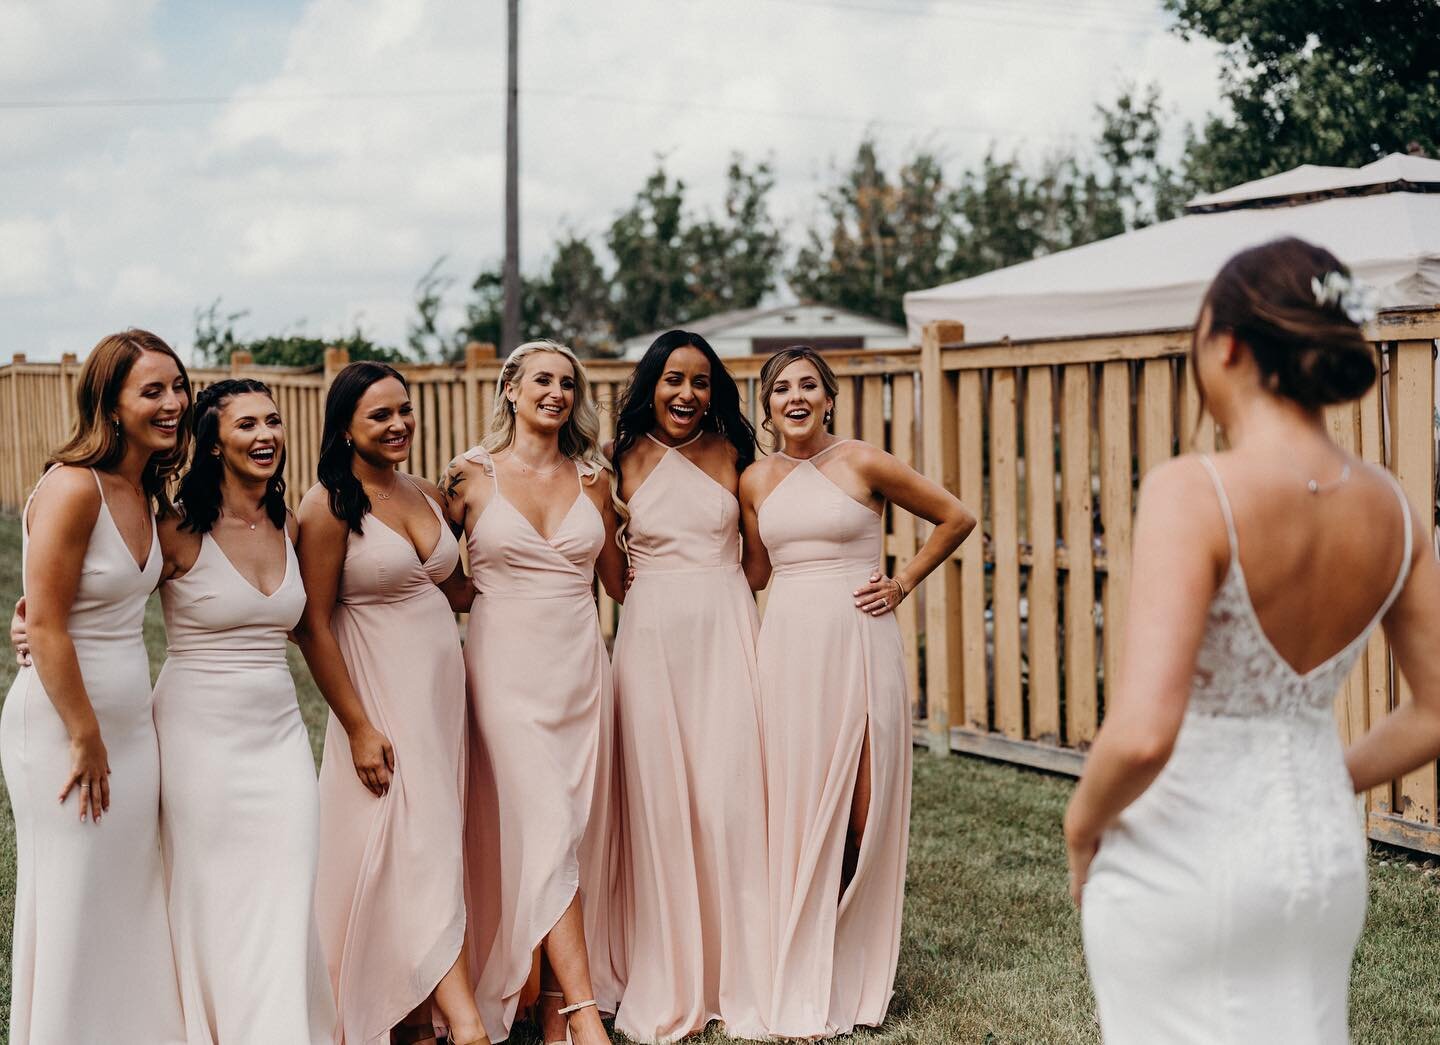 We are all 😍 😍 😍 for this dress reveal shot captured by the fabulous @pictureandpoet ~ such a tight knit group of women, you can feel ALL their love for R on her wedding day 💕